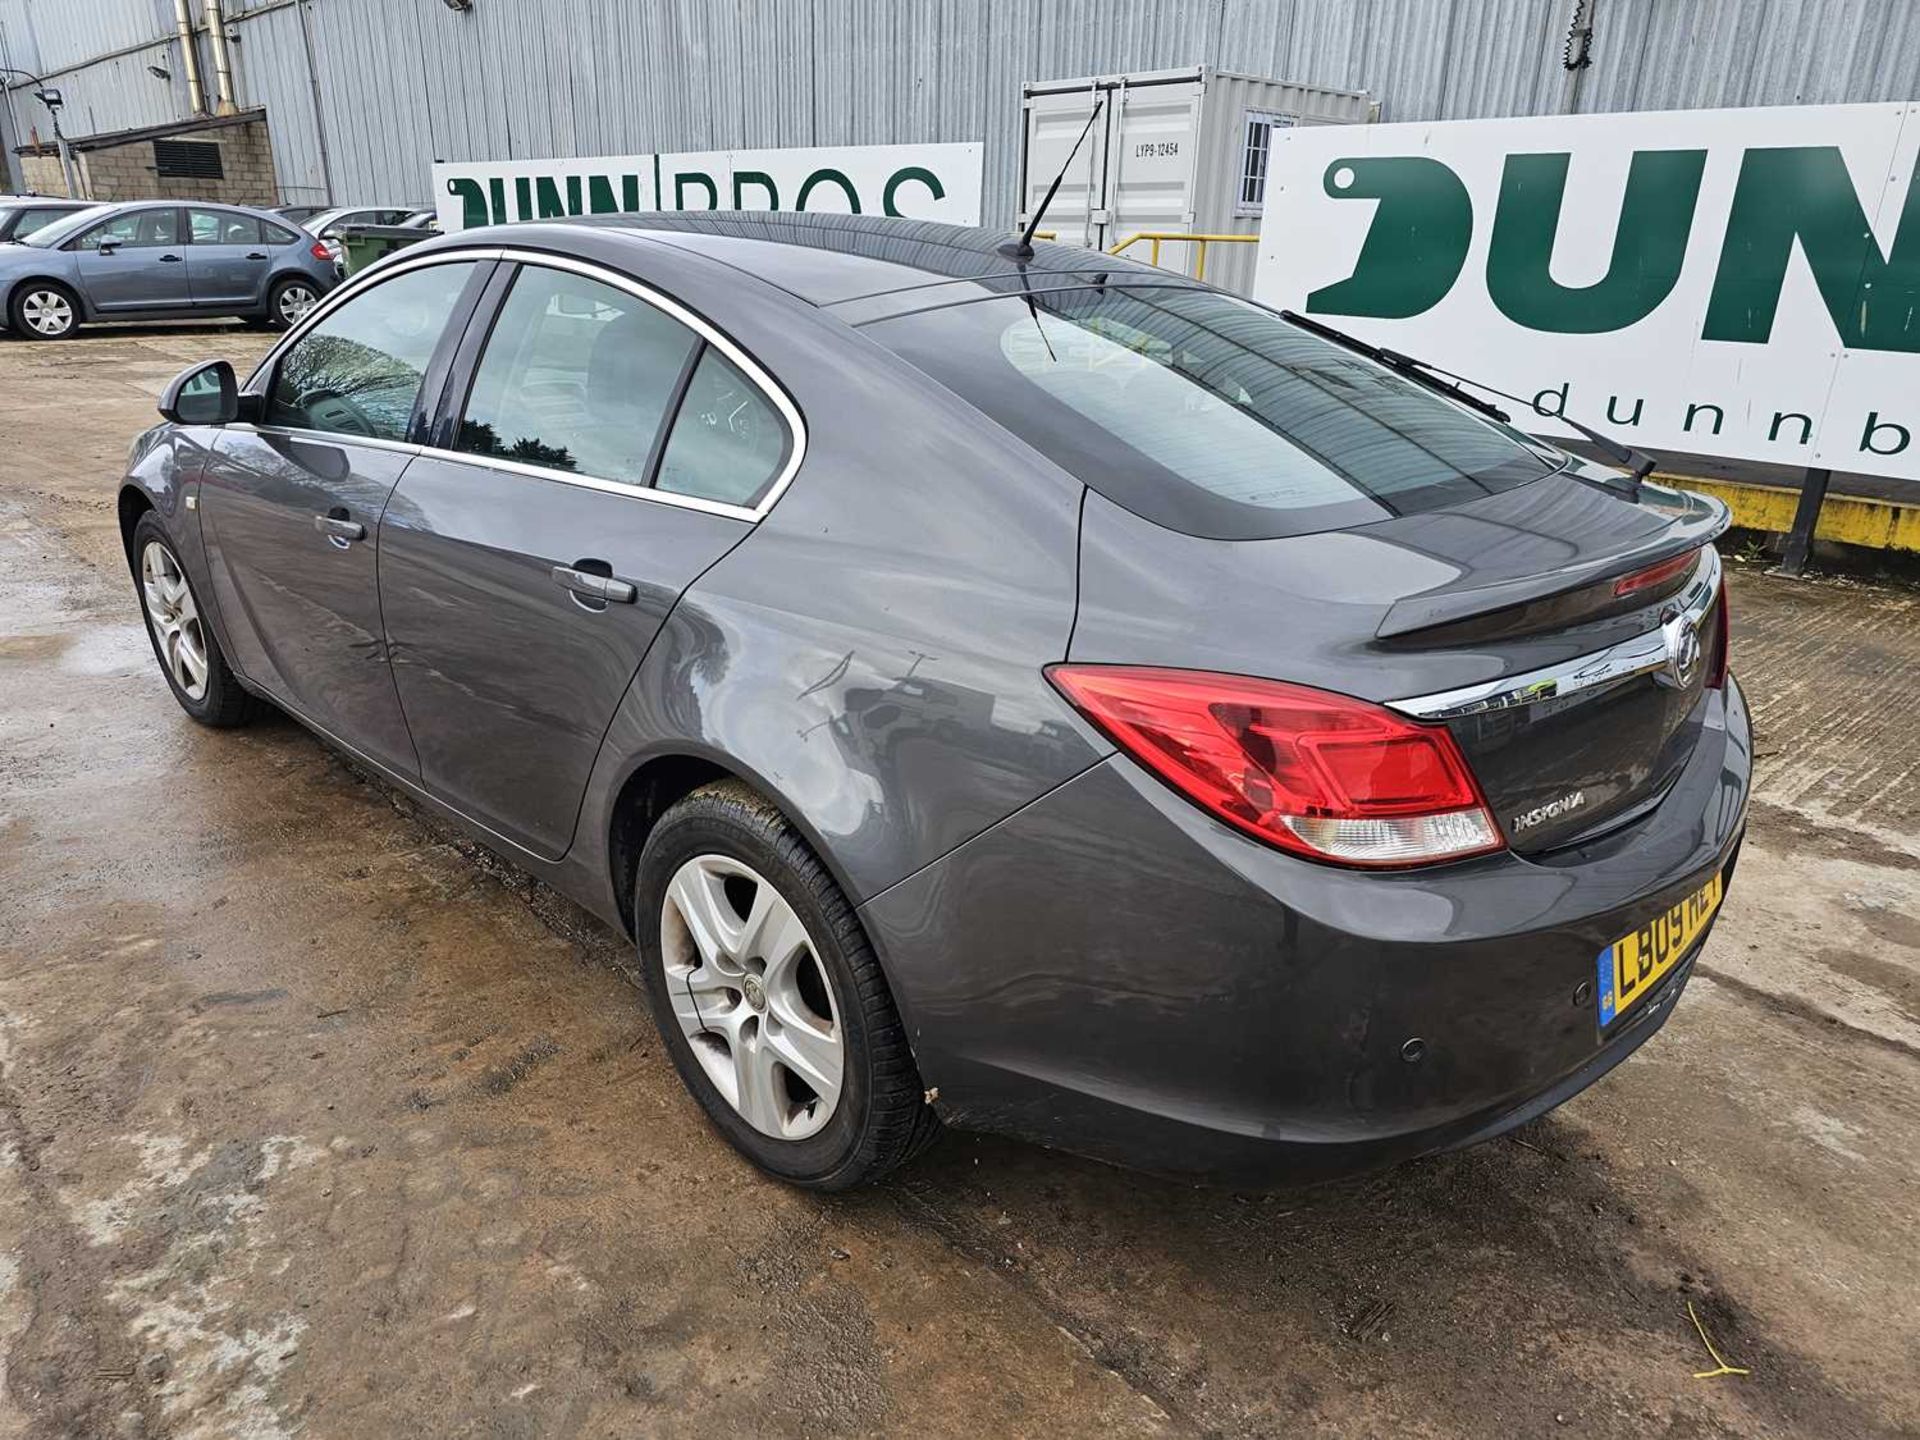 2009 Vauxhall Insignia Exclusive, 6 Speed, Bluetooth, Cruise Control, A/C (Reg. Docs. Available) - Image 3 of 26